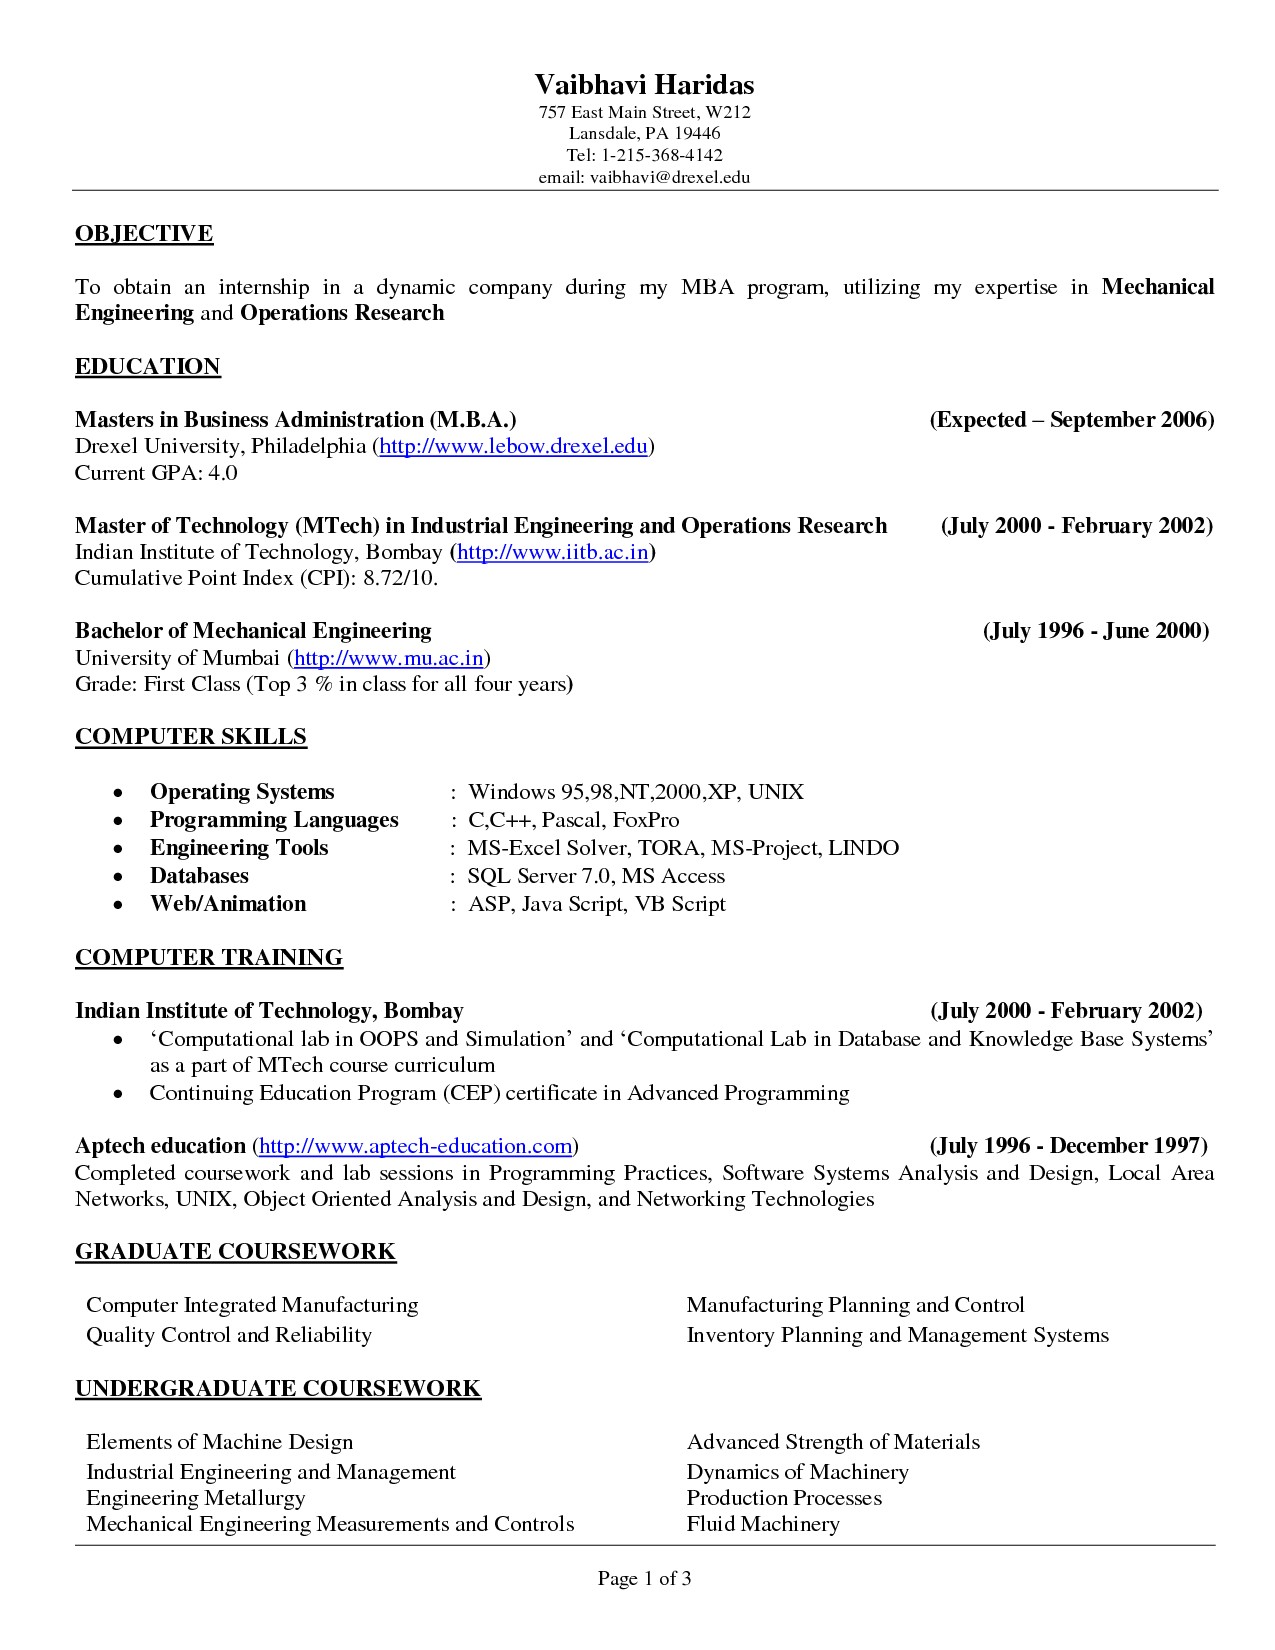 resume objectives